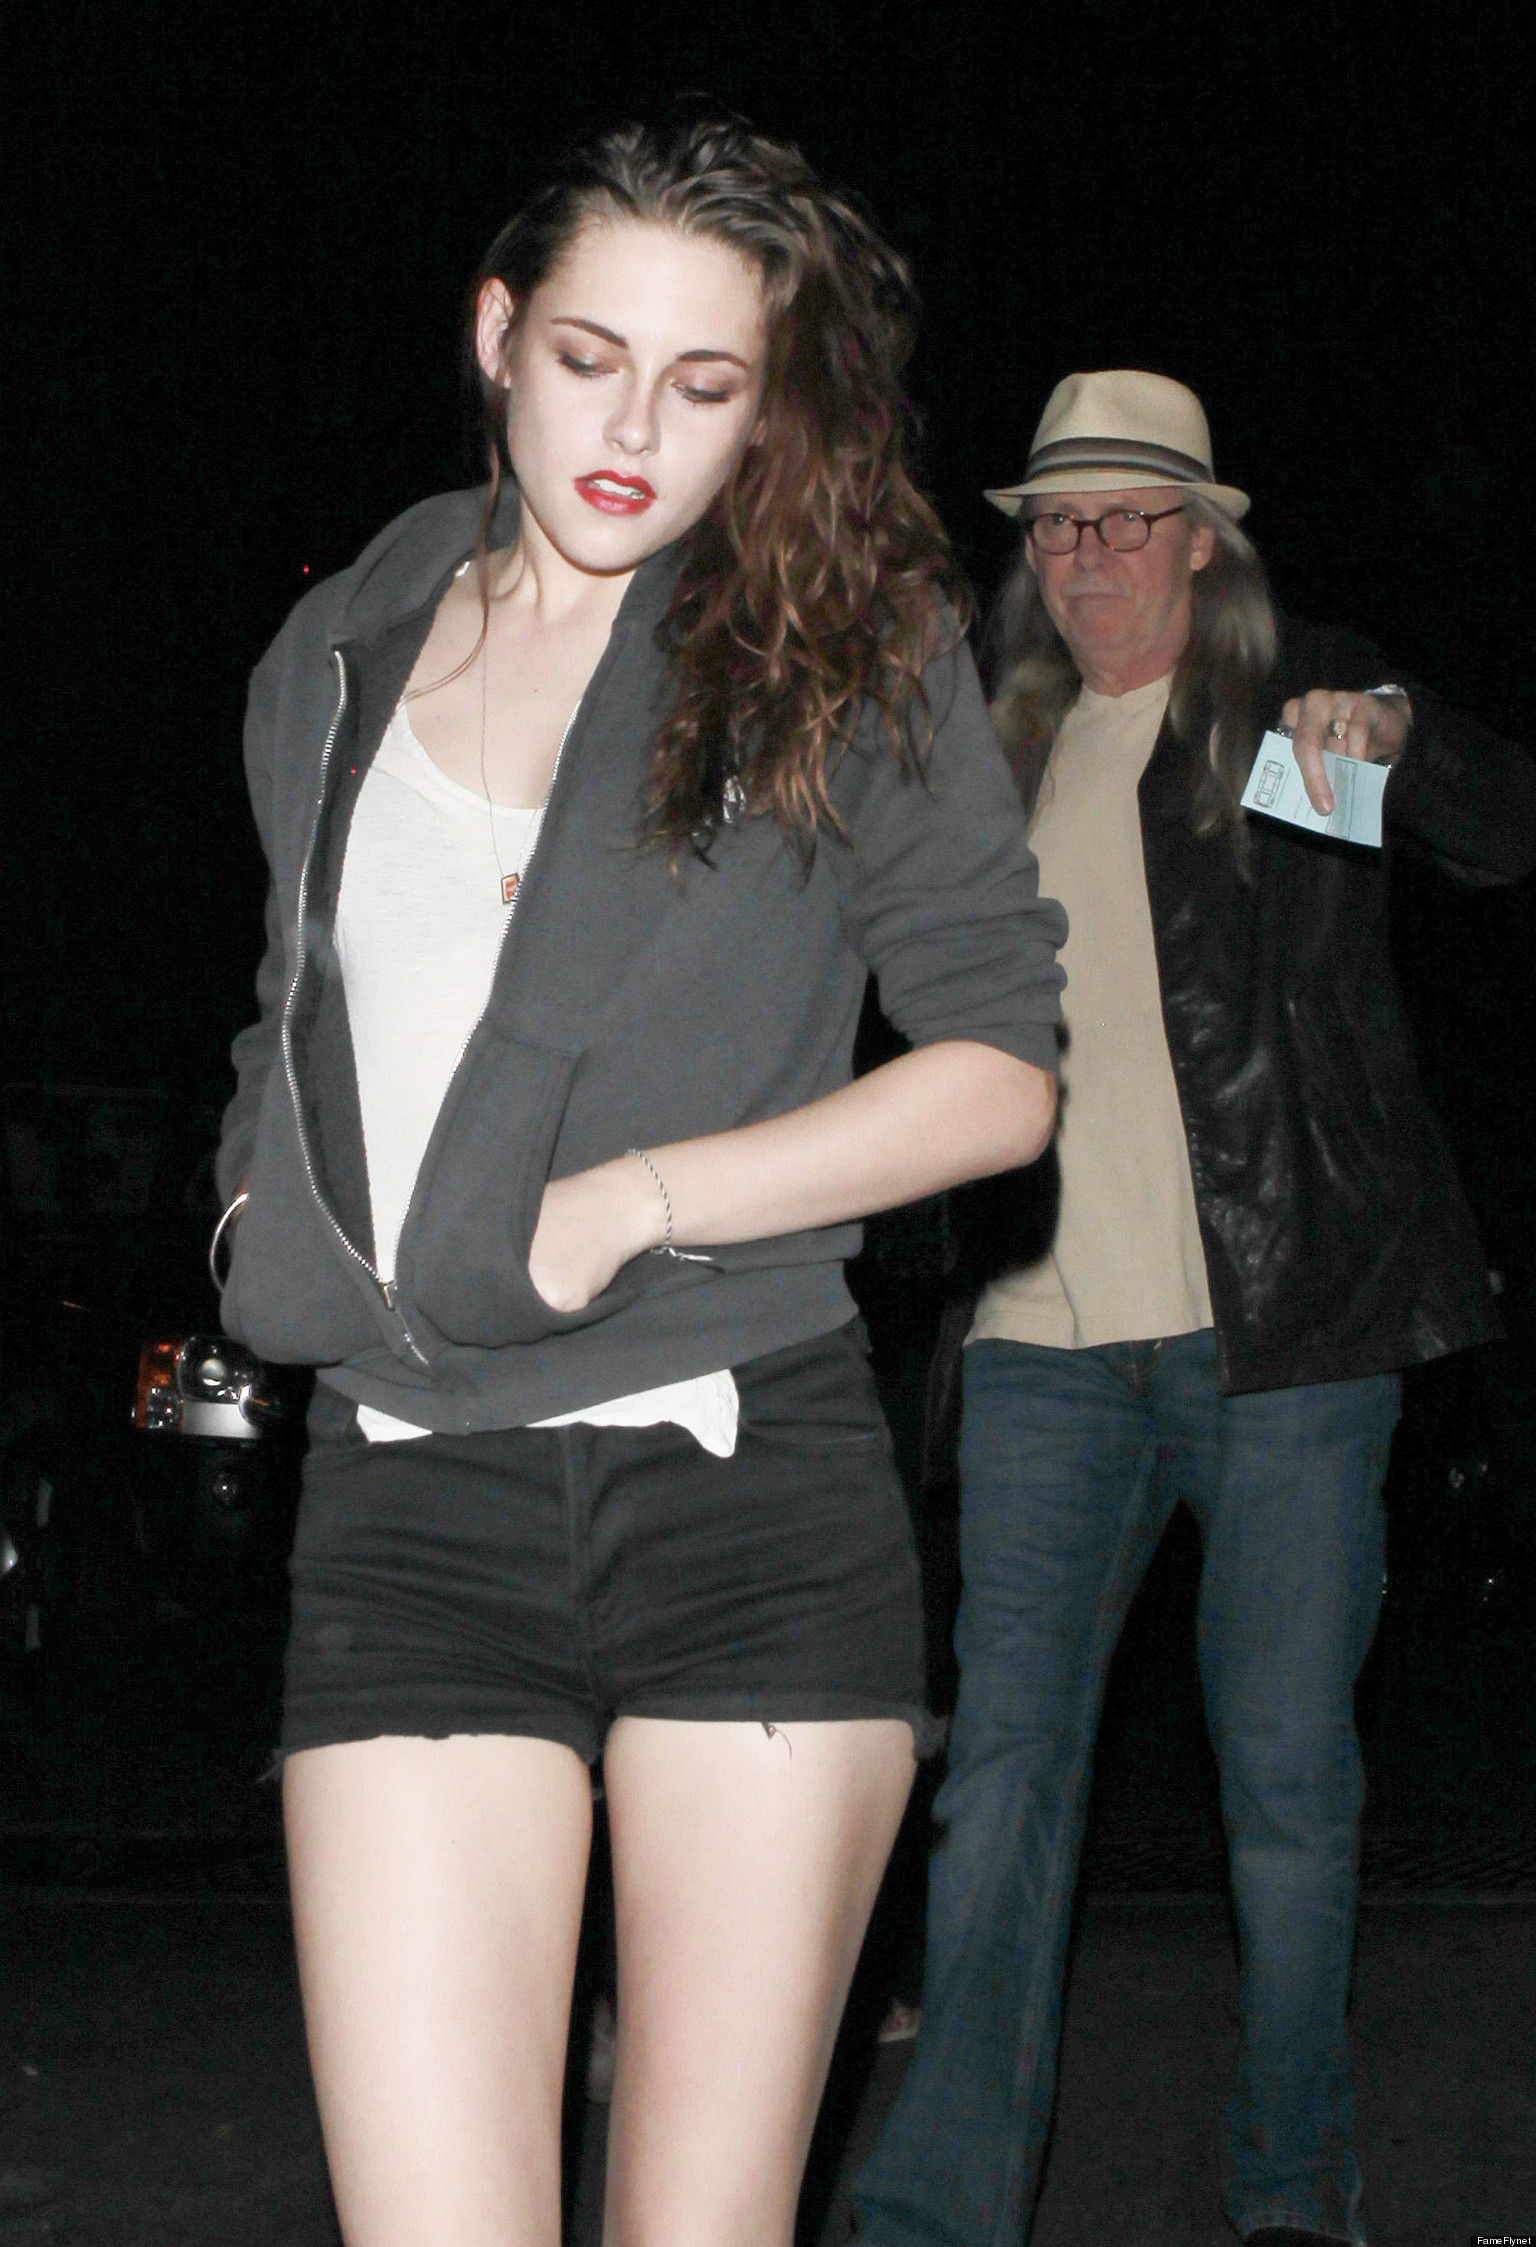 Kristen Stewart's Legs Steal The Show As She Sports Short Shorts To